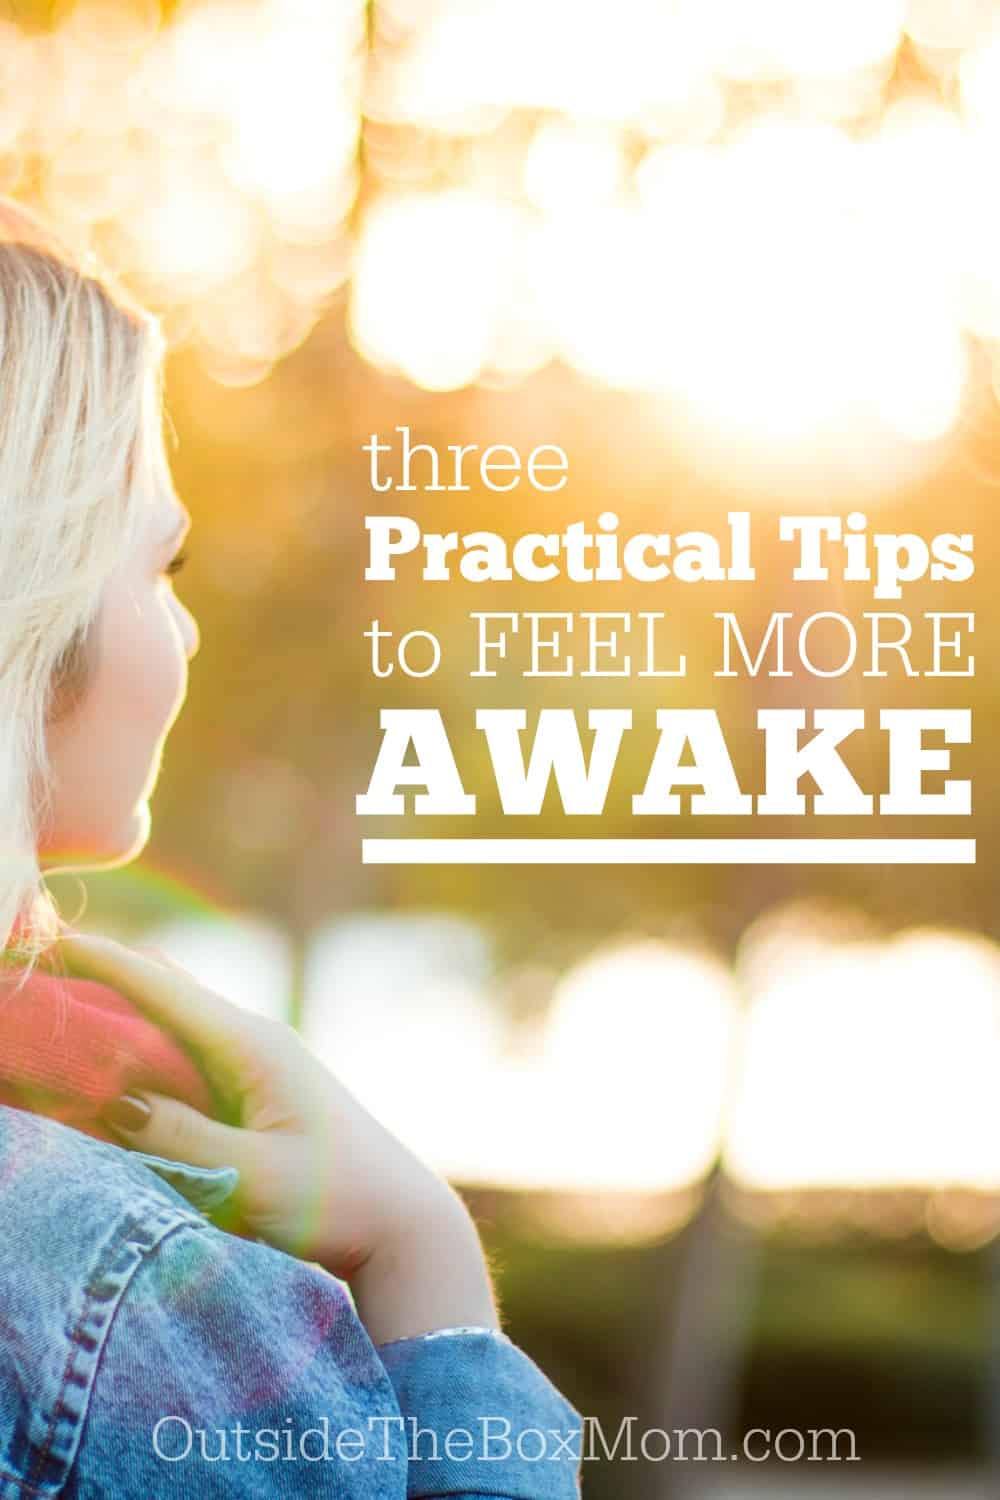 Do you find yourself waking up and feeling like a zombie? It can easily be remedied with these three practical tips to help you feel more awake.